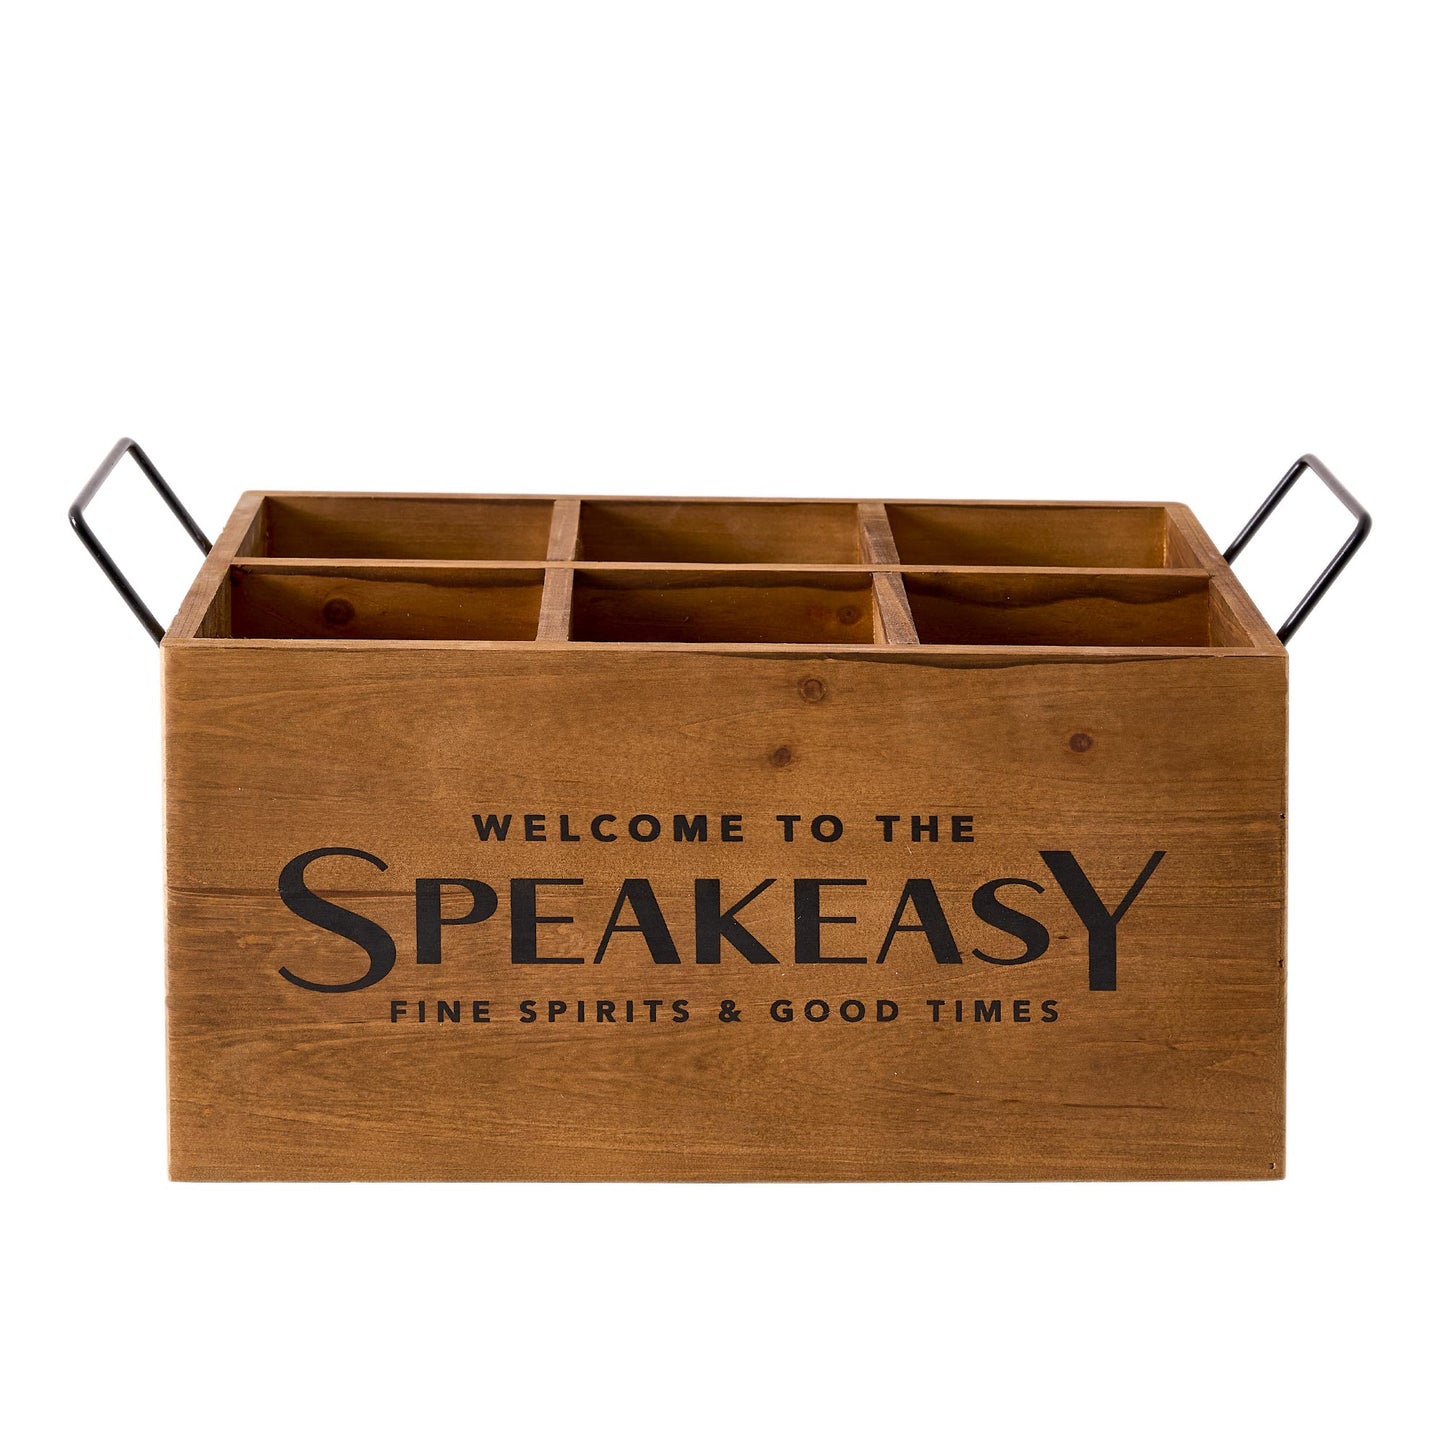 The Speakeasy Wood Crate Bottle Holder with Metal Handles - 7" H x 14" L x 8" D